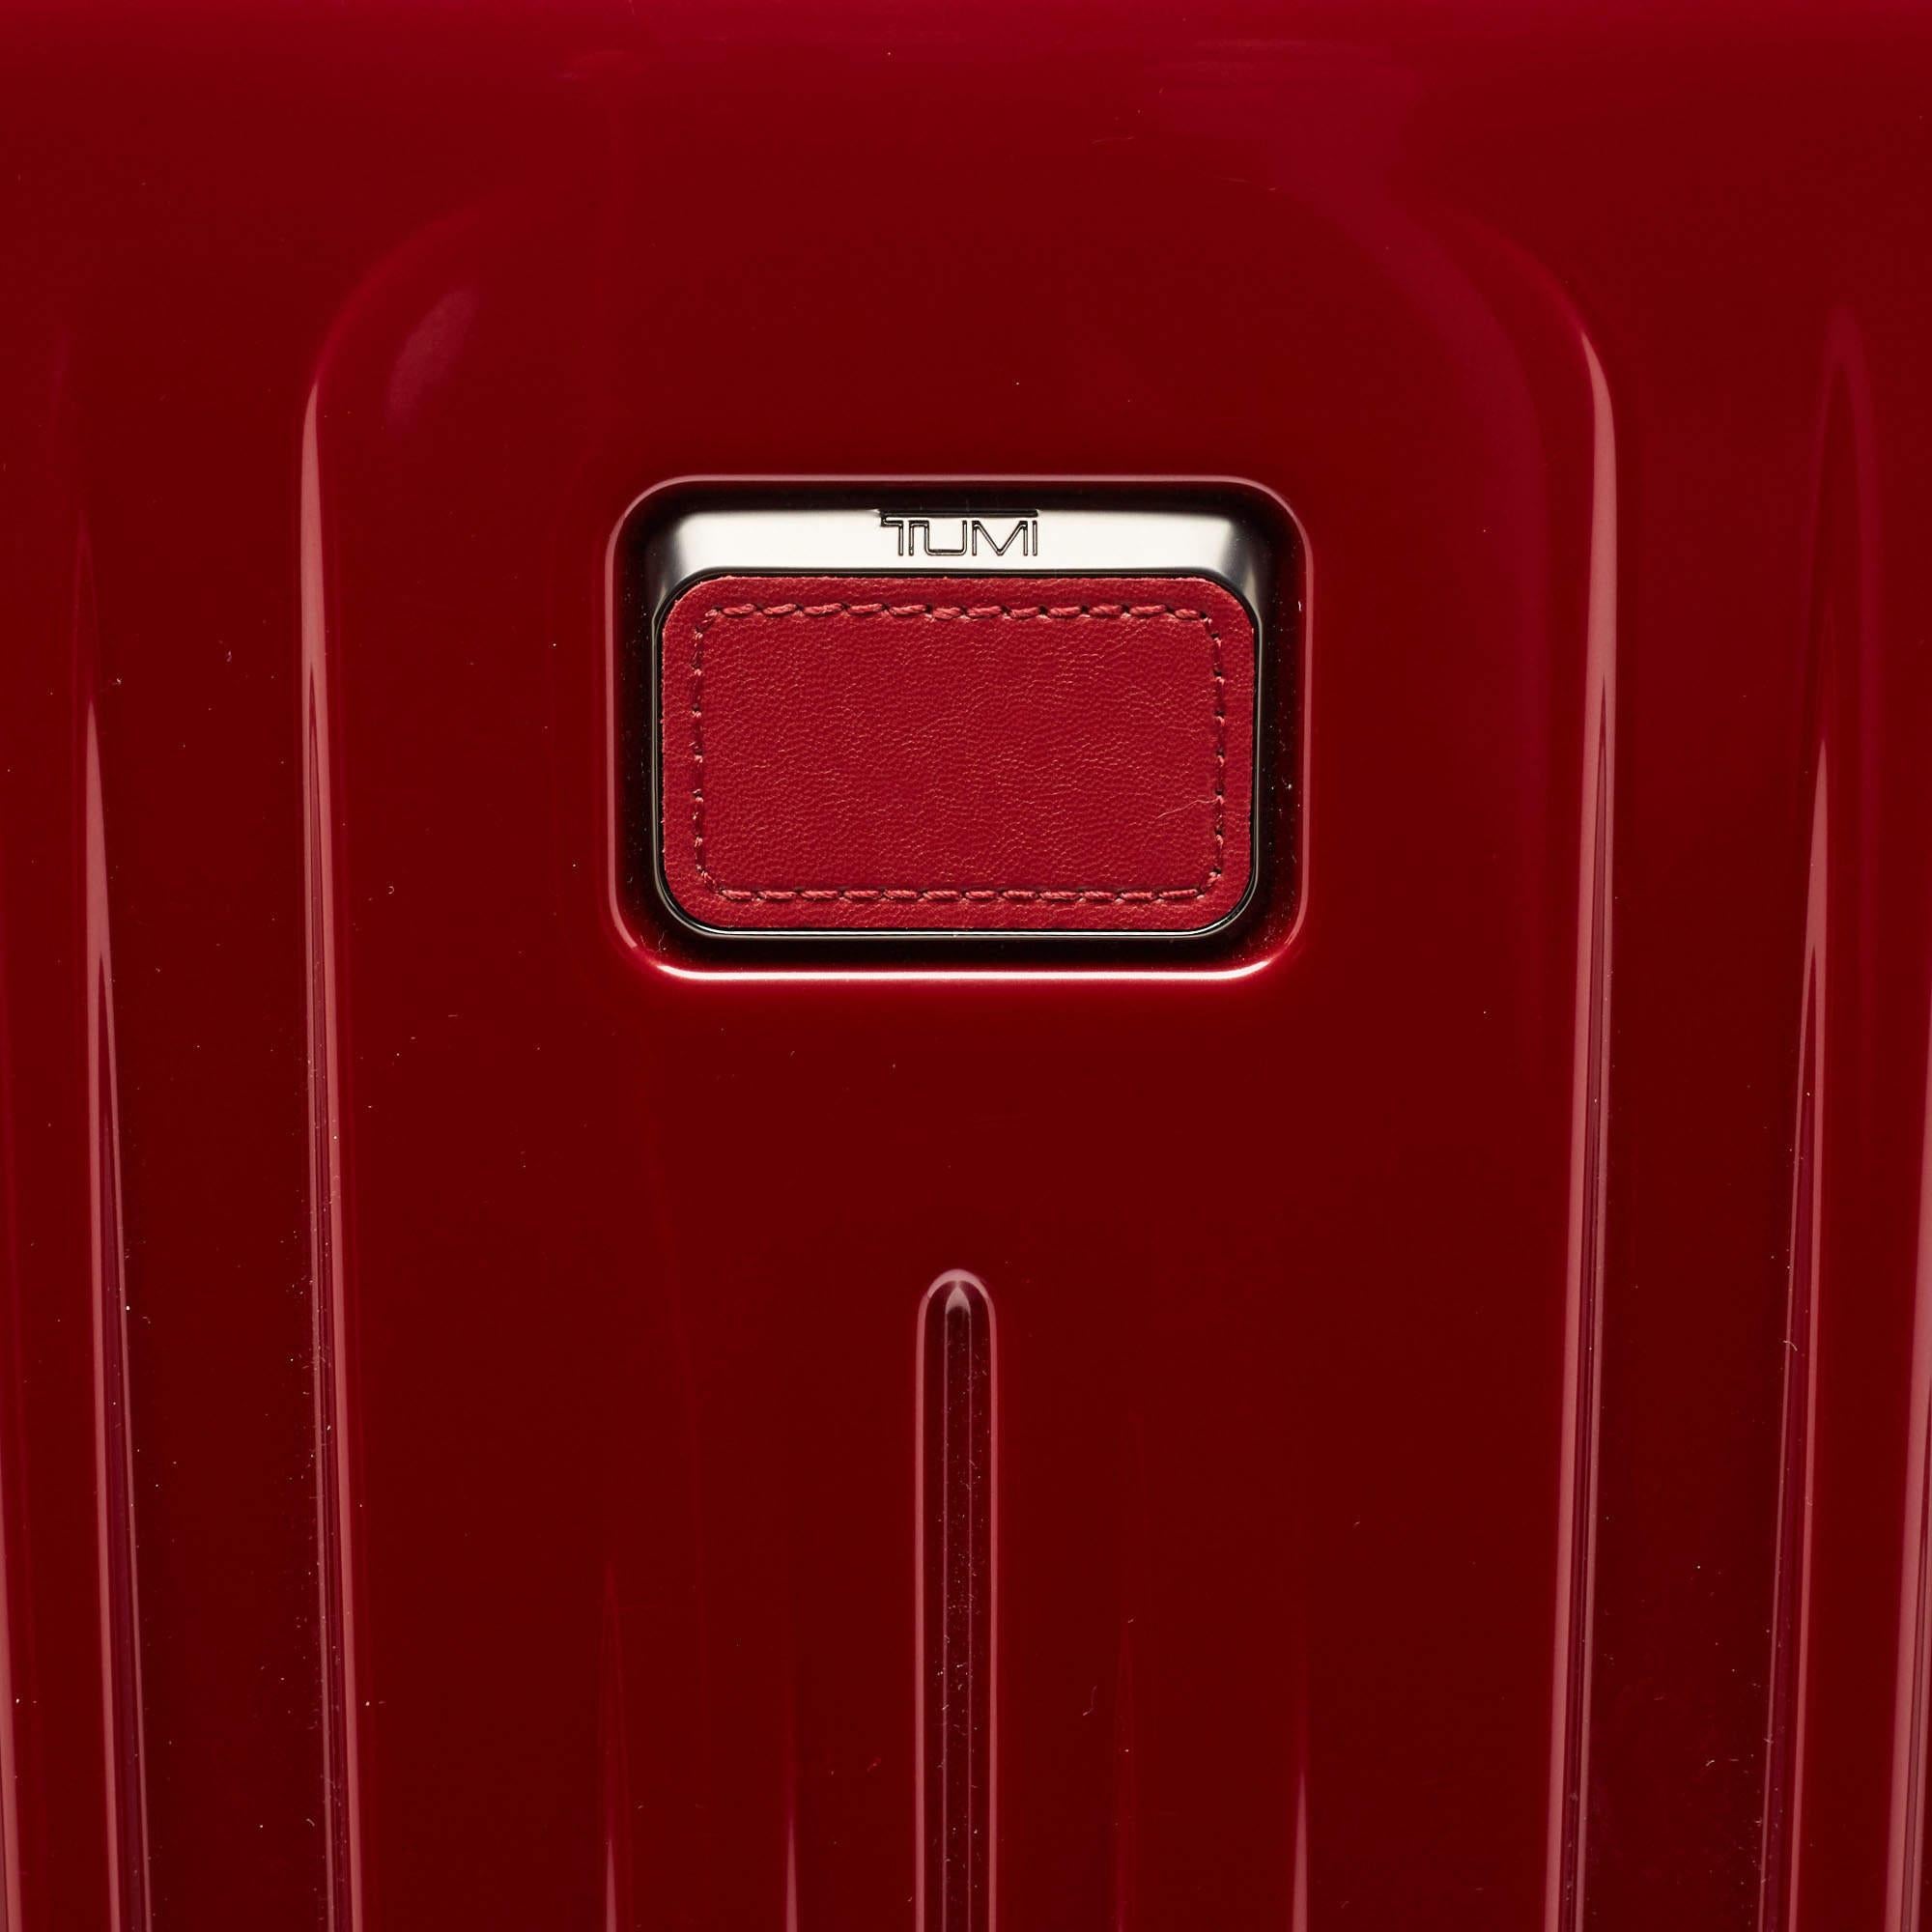 TUMI Red 4 Wheeled V4 International Expandable Carry On Luggage (Bagages à main extensibles à 4 roues) en vente 9